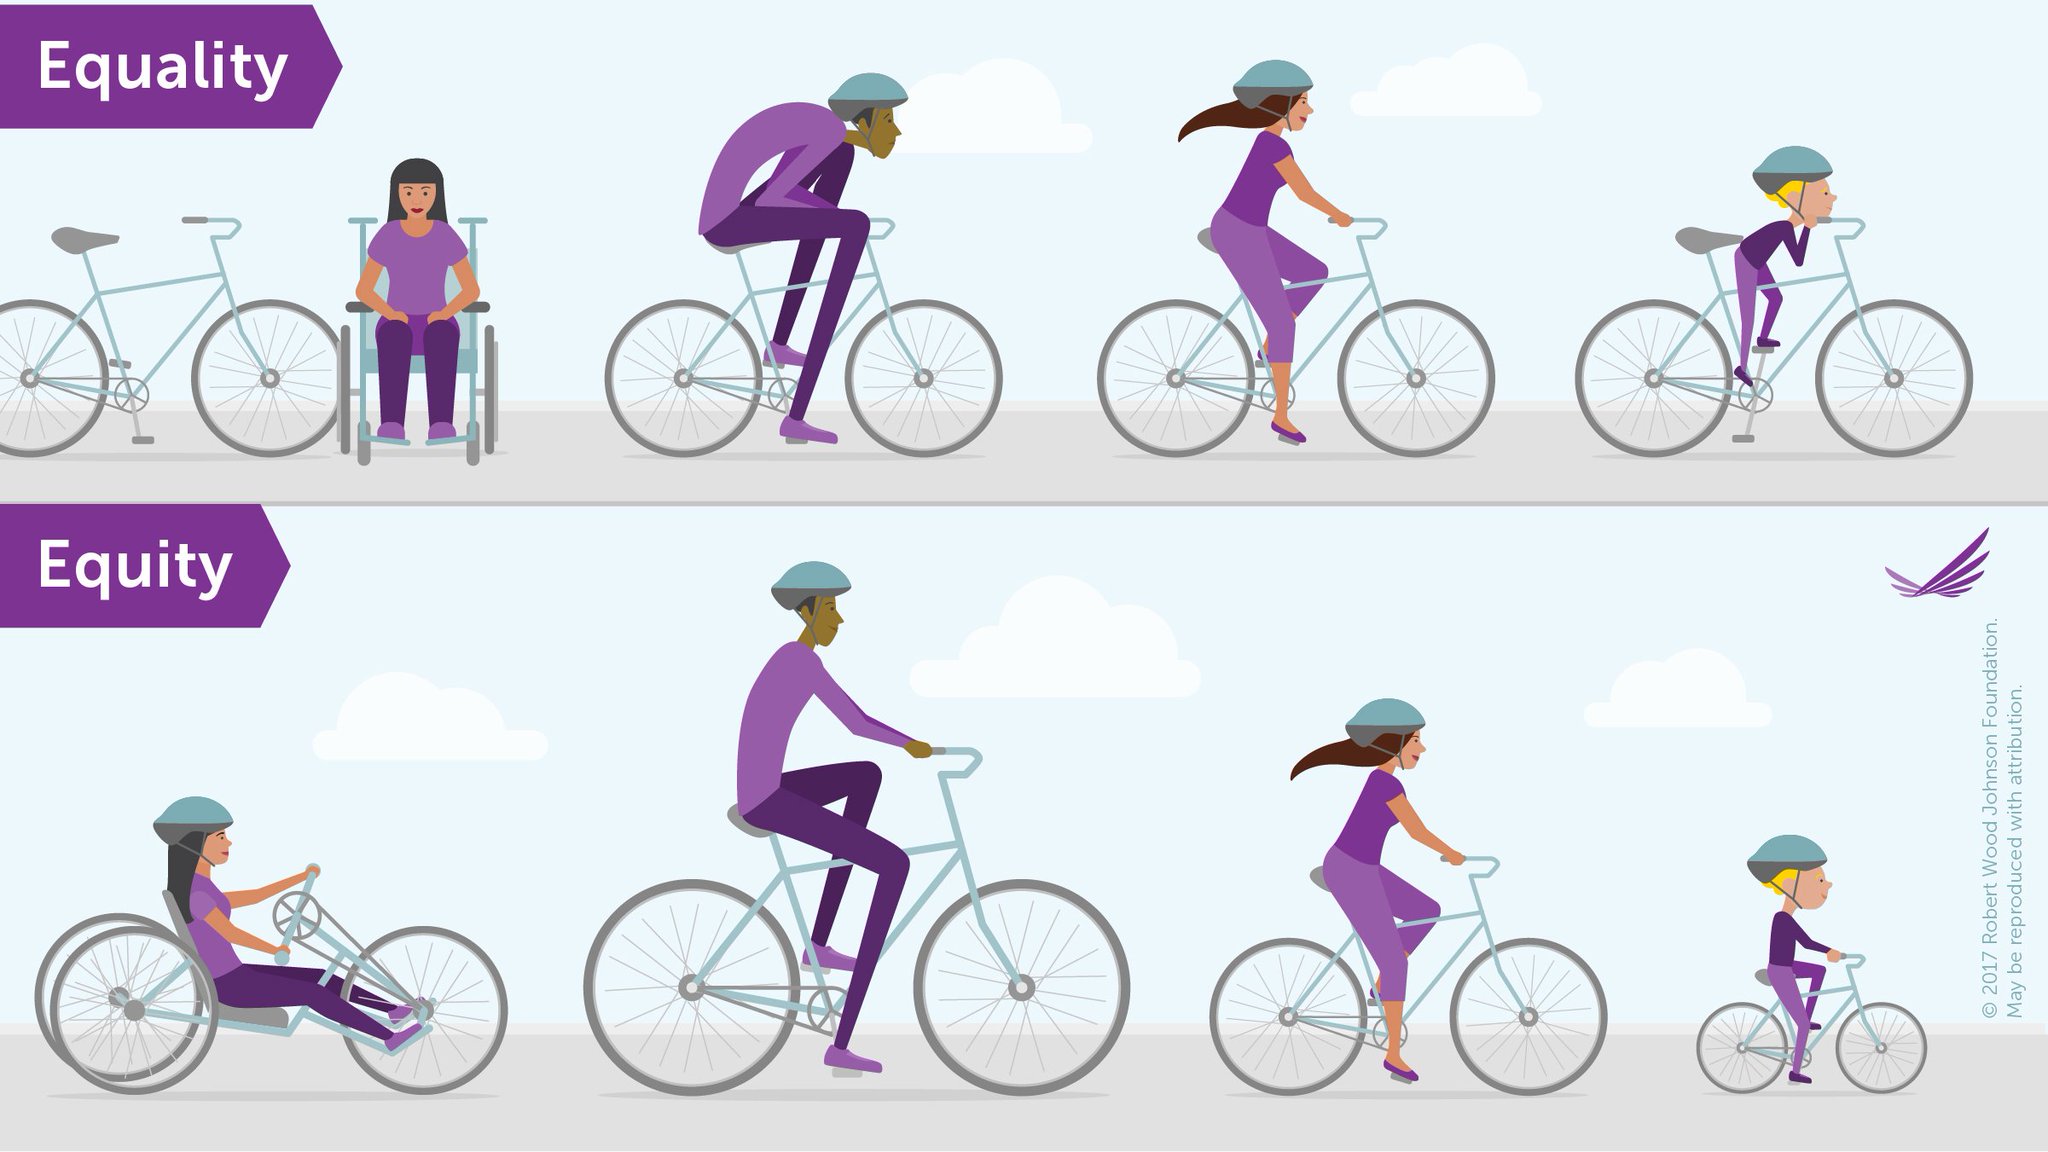 Illustration using bikes to show the difference between equality and equity, courtesy of Robert Wood Johnson Foundation. In equality, everyone is given an equal size bike, from the tall man to the smaller woman to the child to the disabled woman. In equity, each has an adapted bike to fit their needs